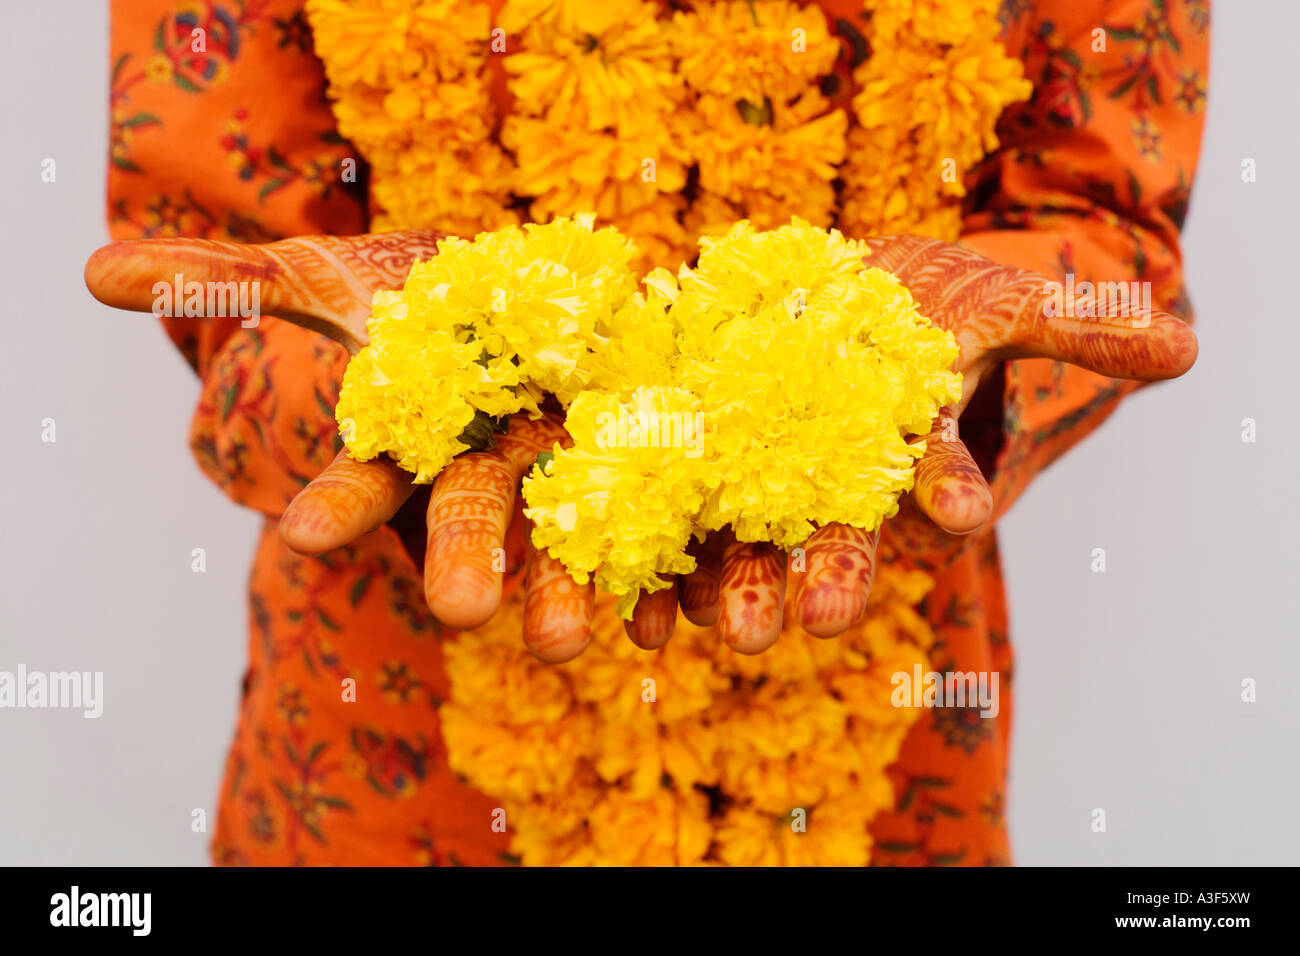 Mid section view of a woman holding Marigolds Stock Photo